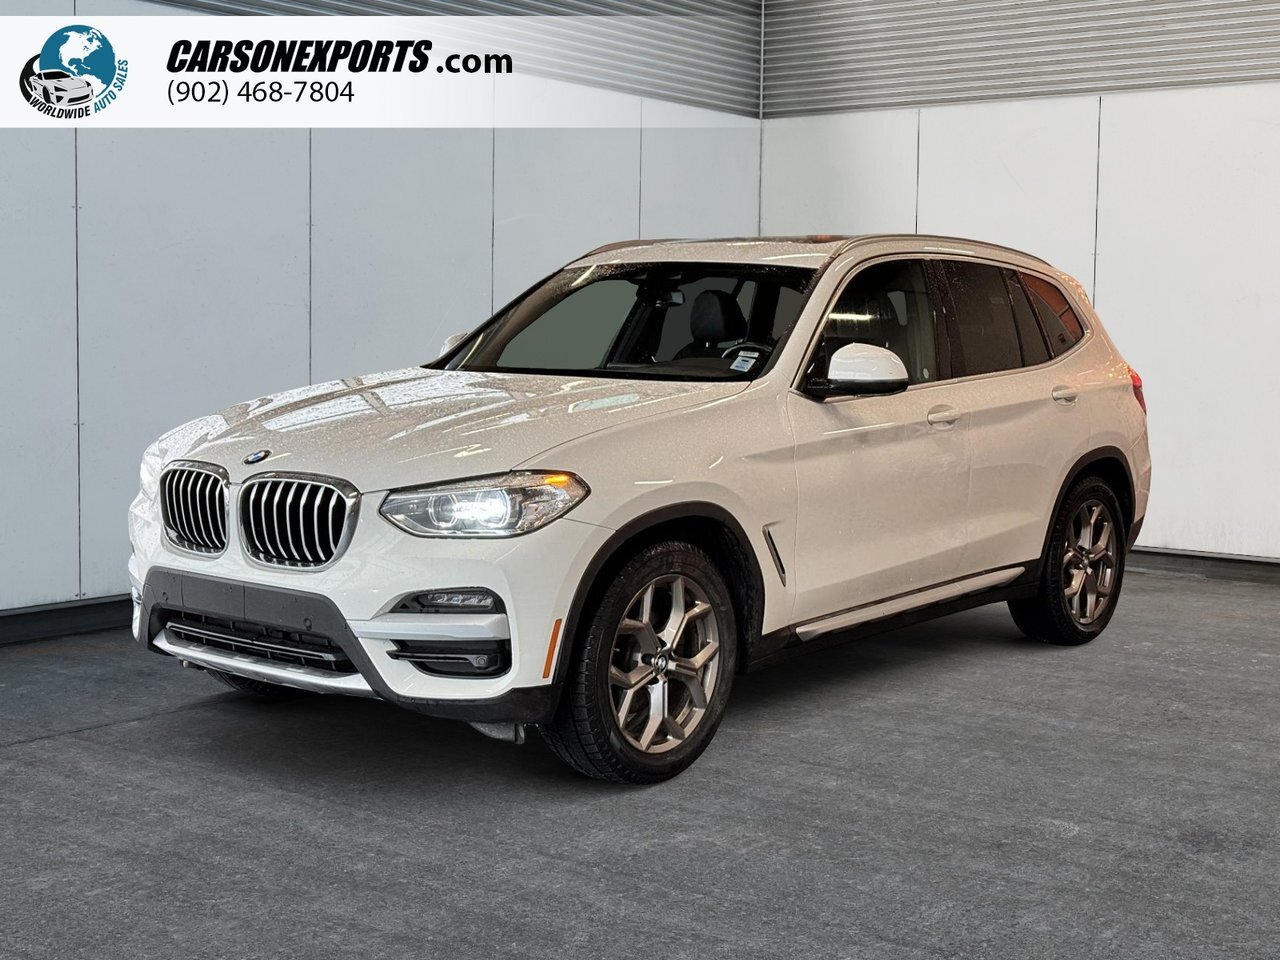 2021 BMW X3 XDrive30i The best place to buy a used car. Period